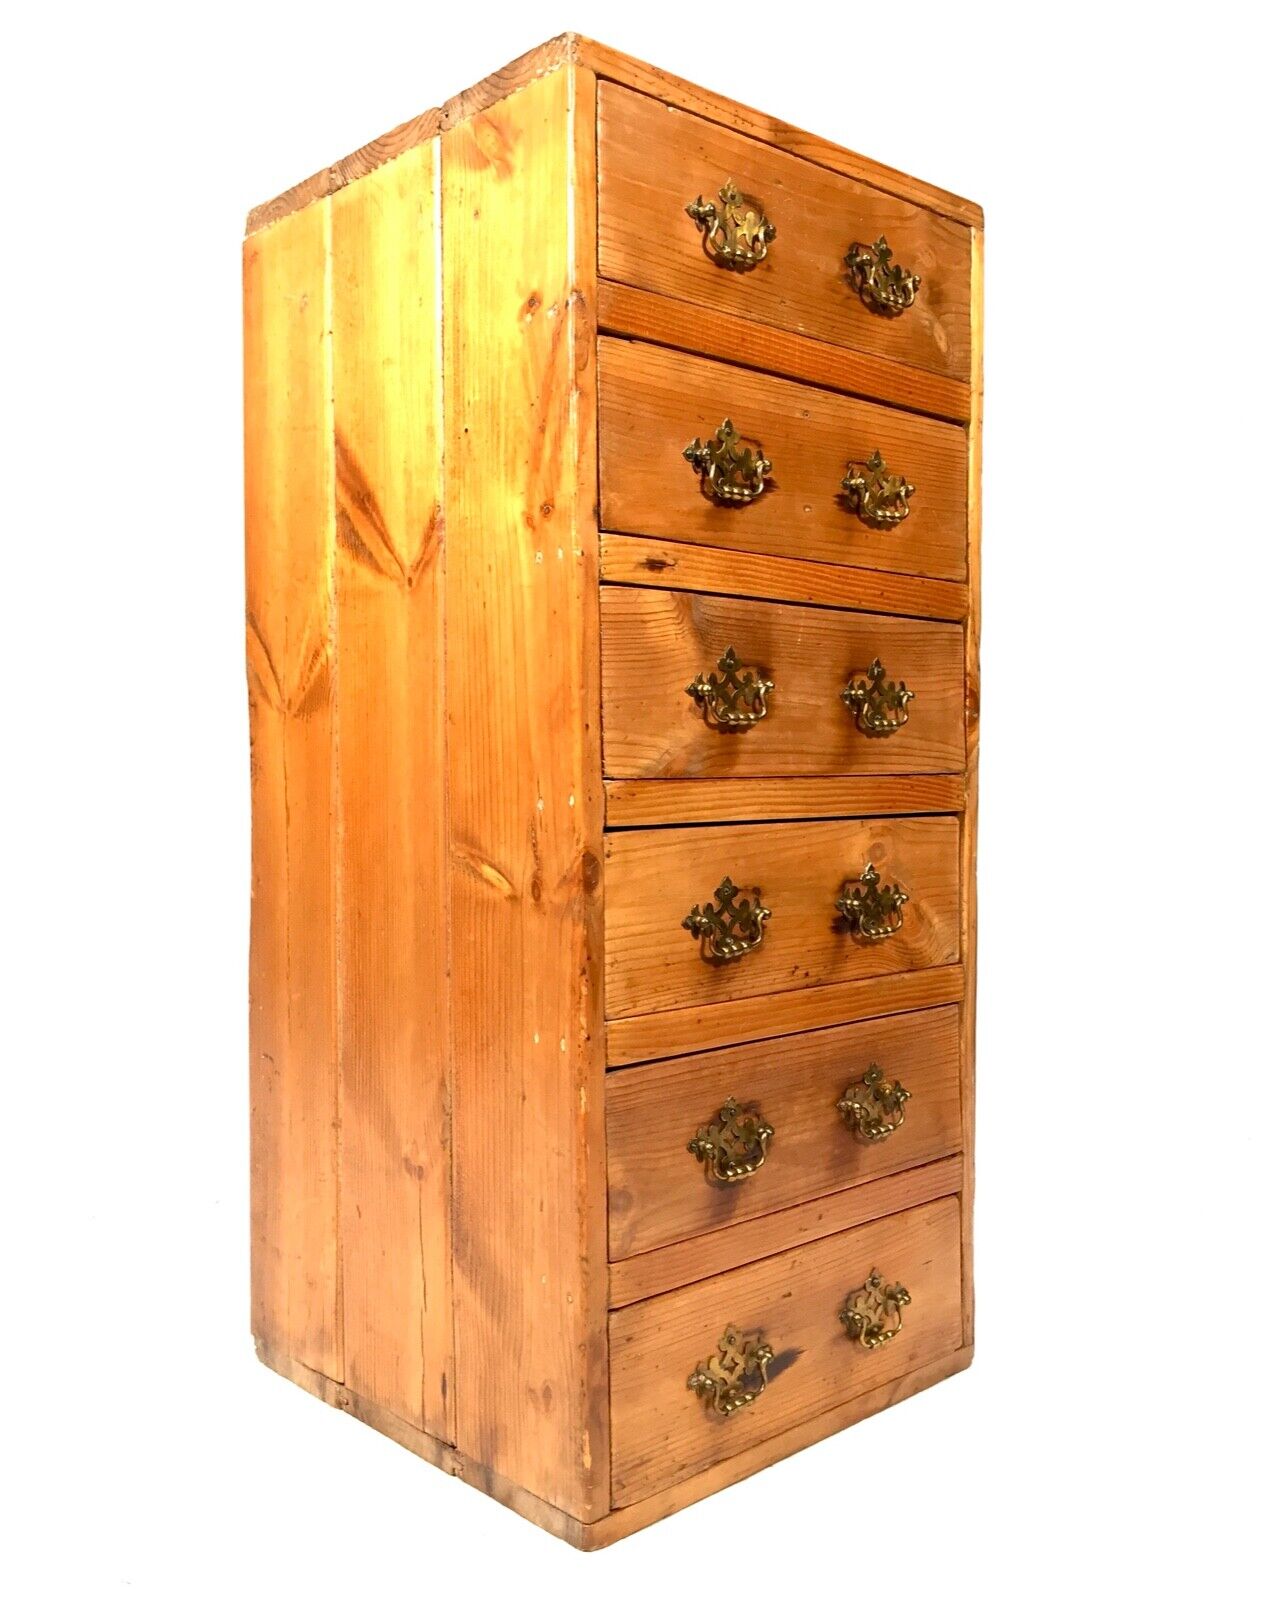 Antique Rustic Pine Tabletop or Floor Standing Filing Cabinet / Chest of Drawers